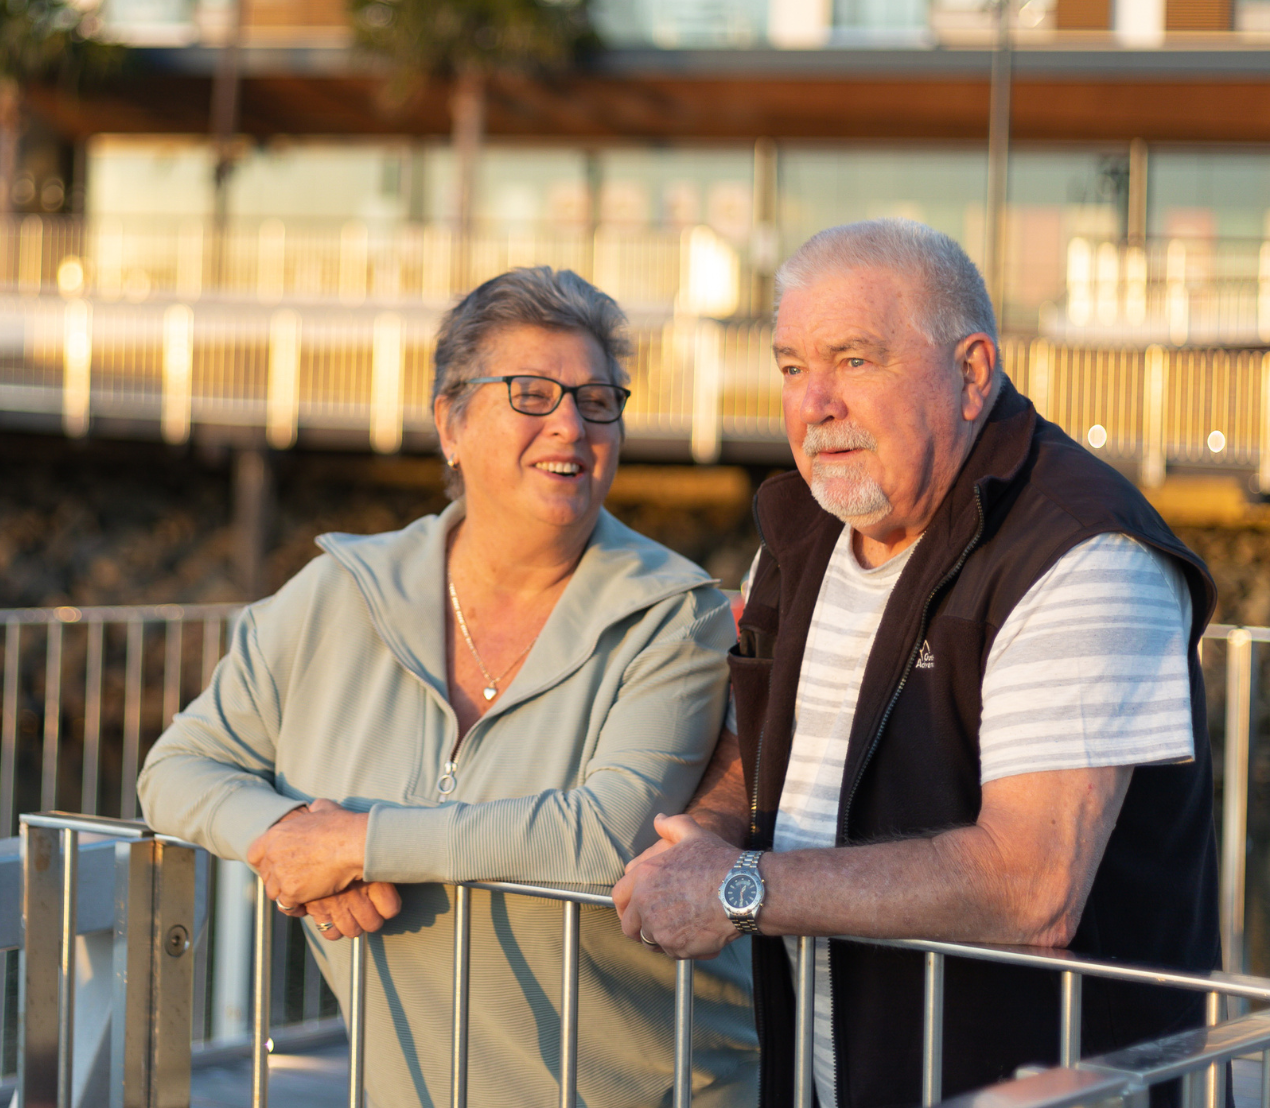 Warrigal Shell Cove village residents smile together at sunrise